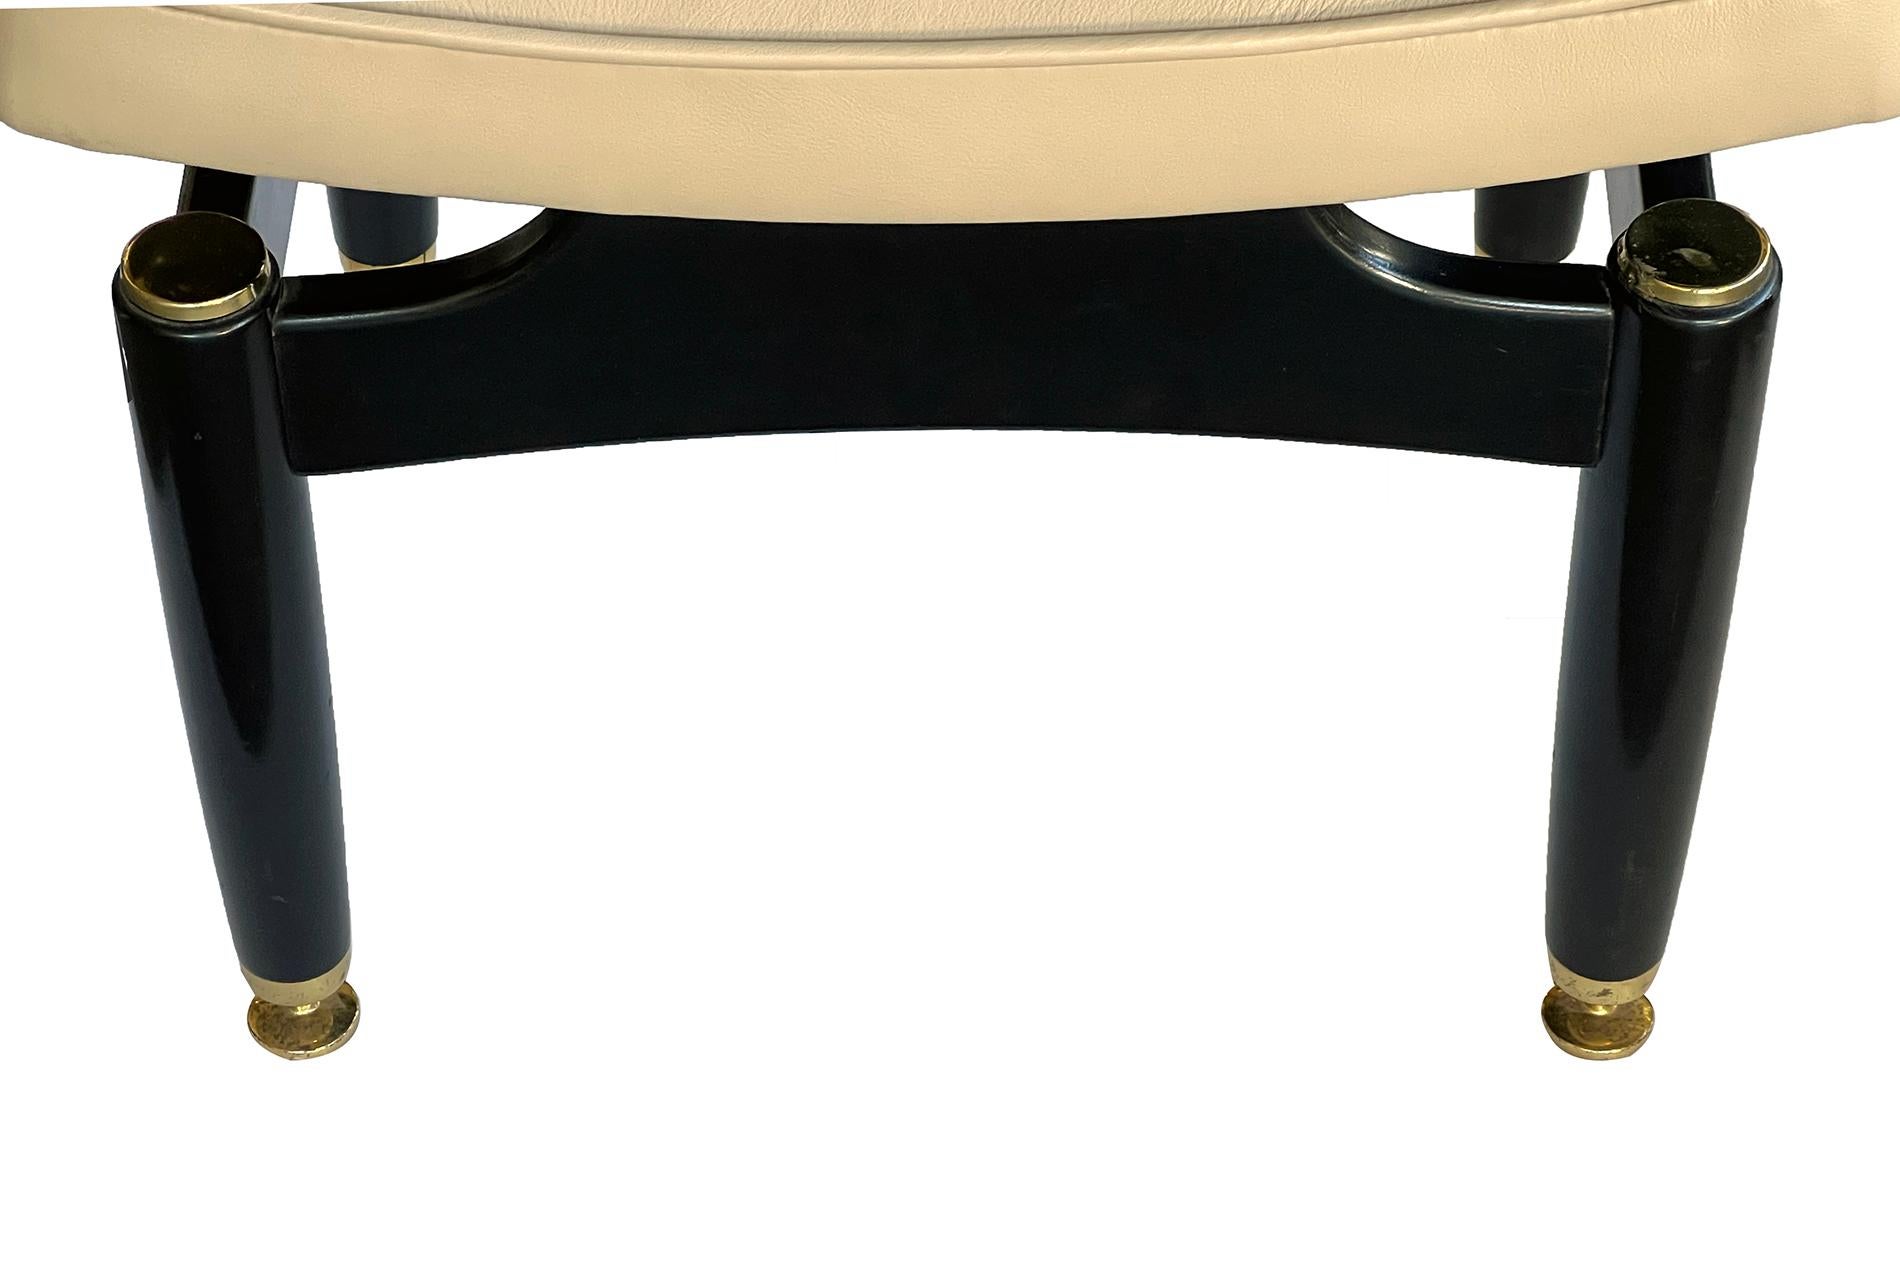 A Vintage Pair of English 1950s G-Plan Ebonized Stools  In Good Condition For Sale In San Francisco, CA